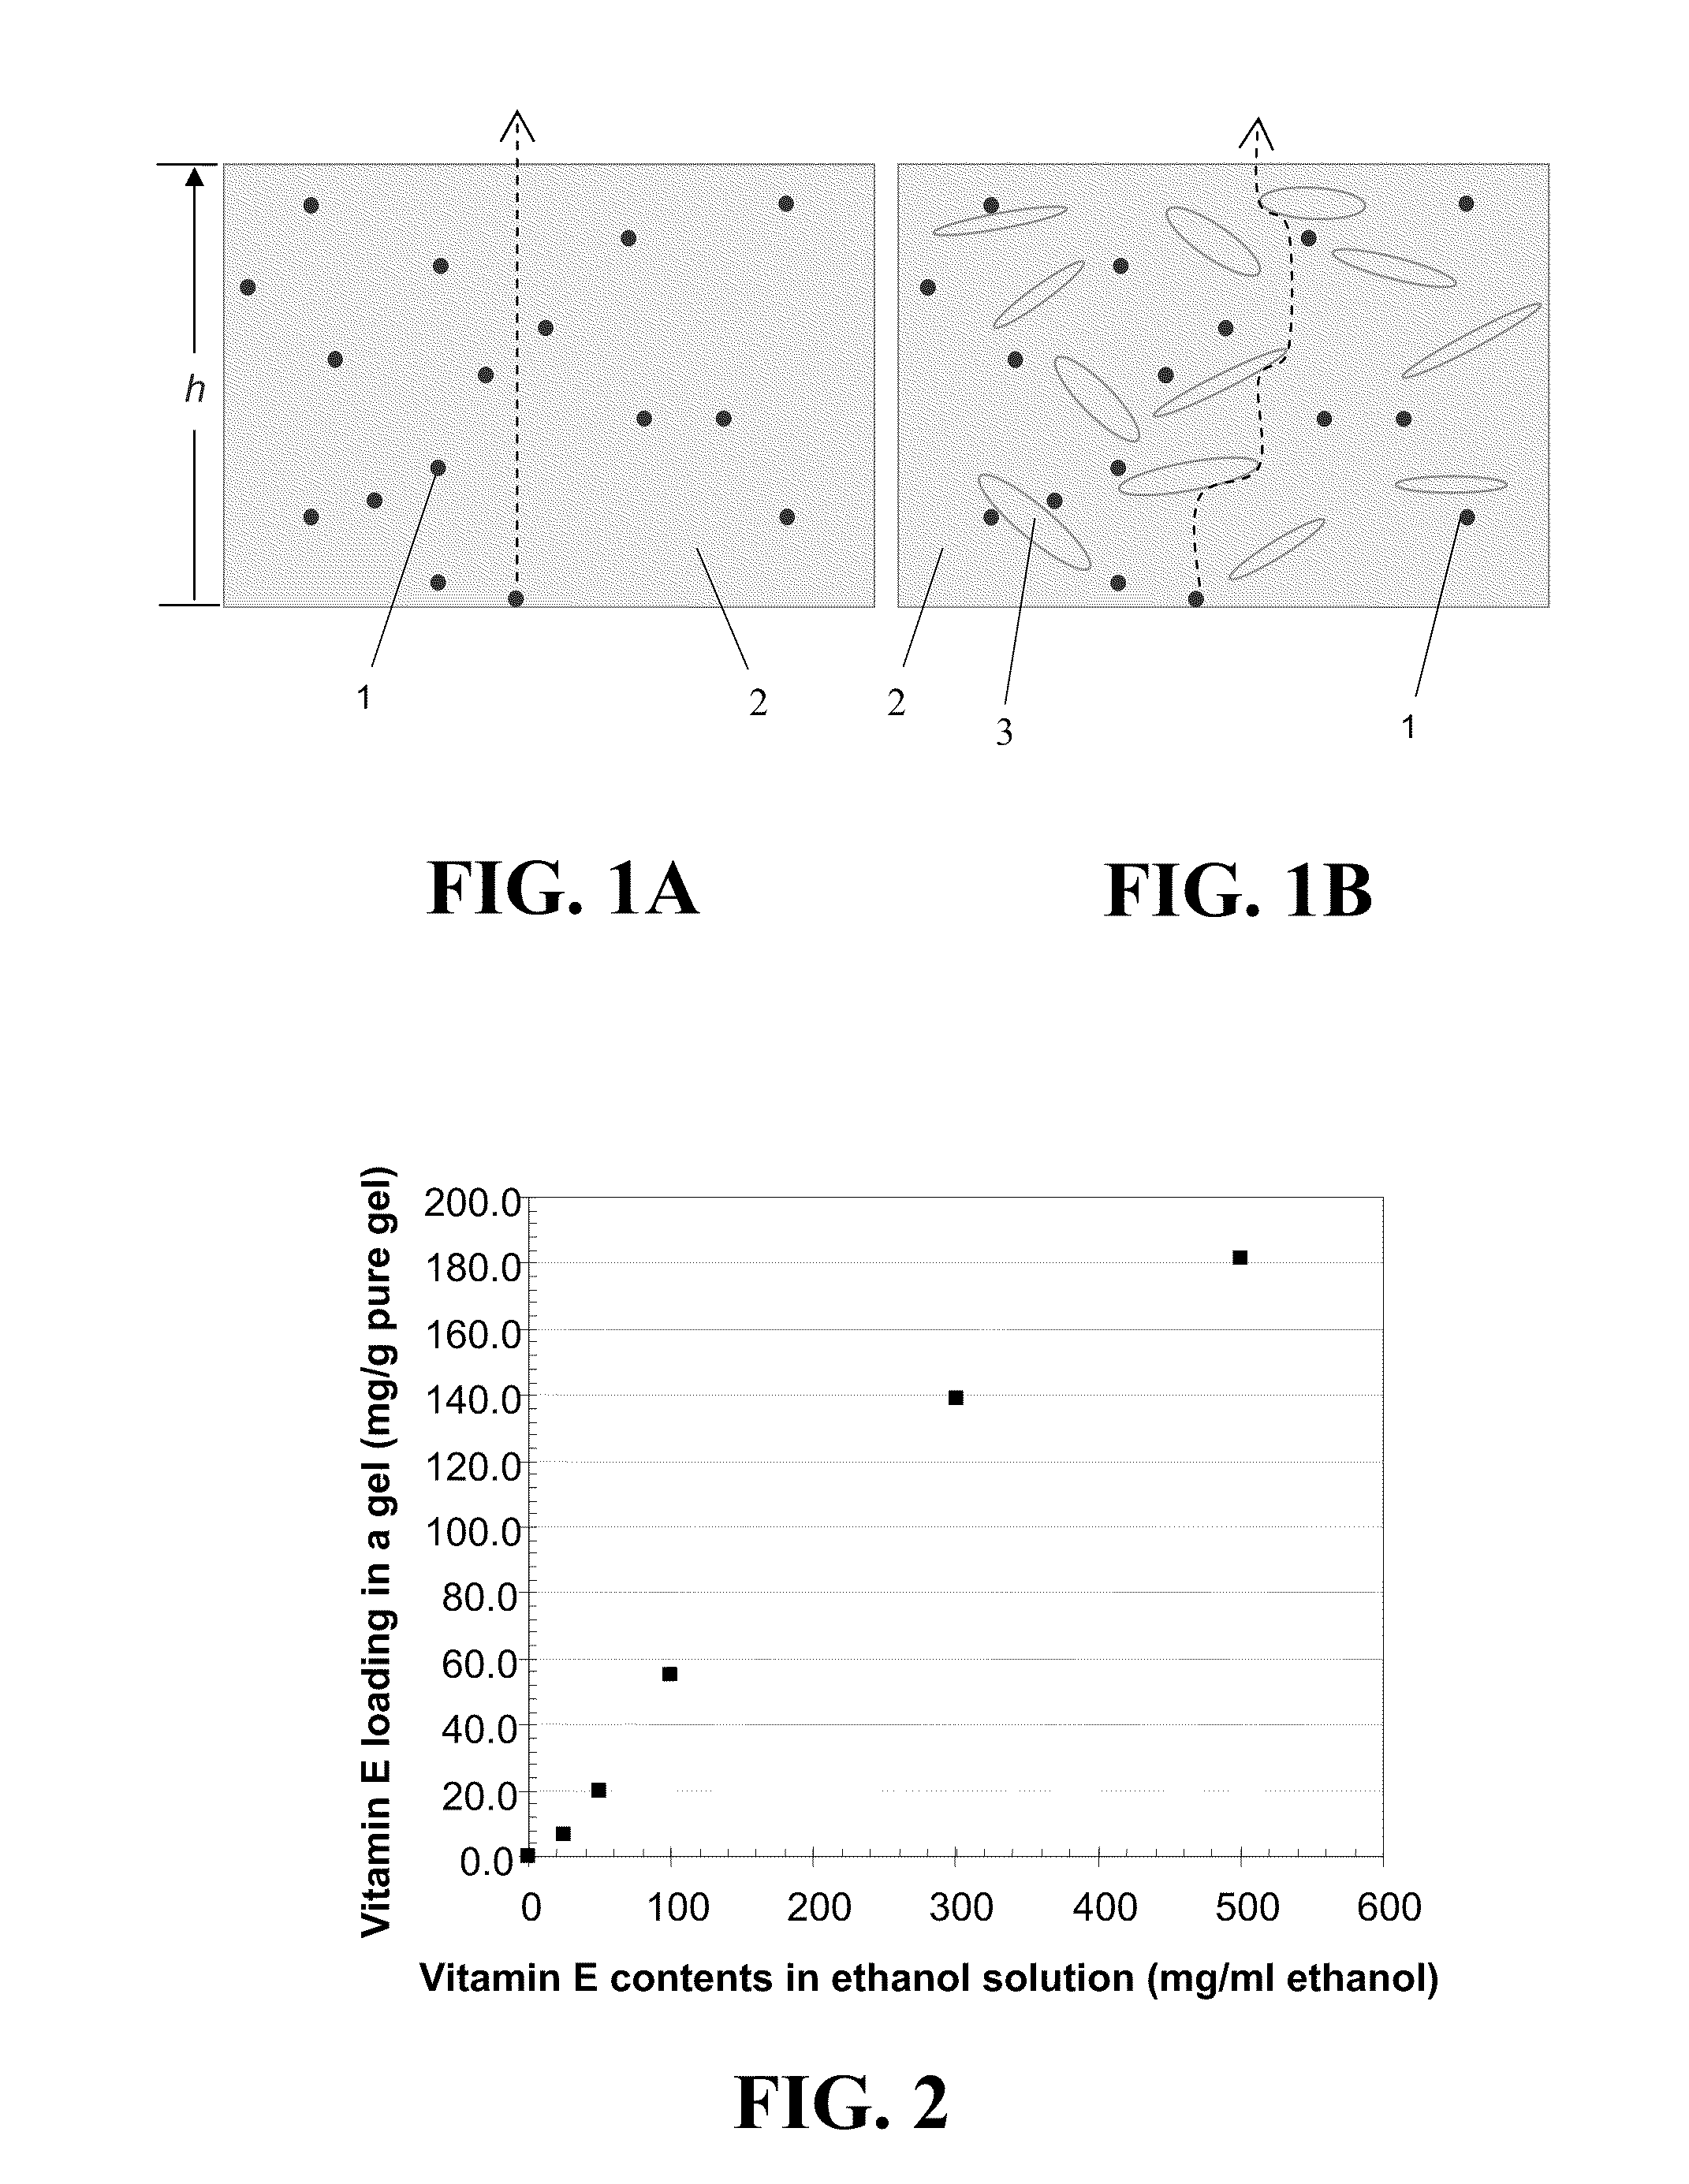 Contact lenses for extended release of bioactive agents containing diffusion attenuators